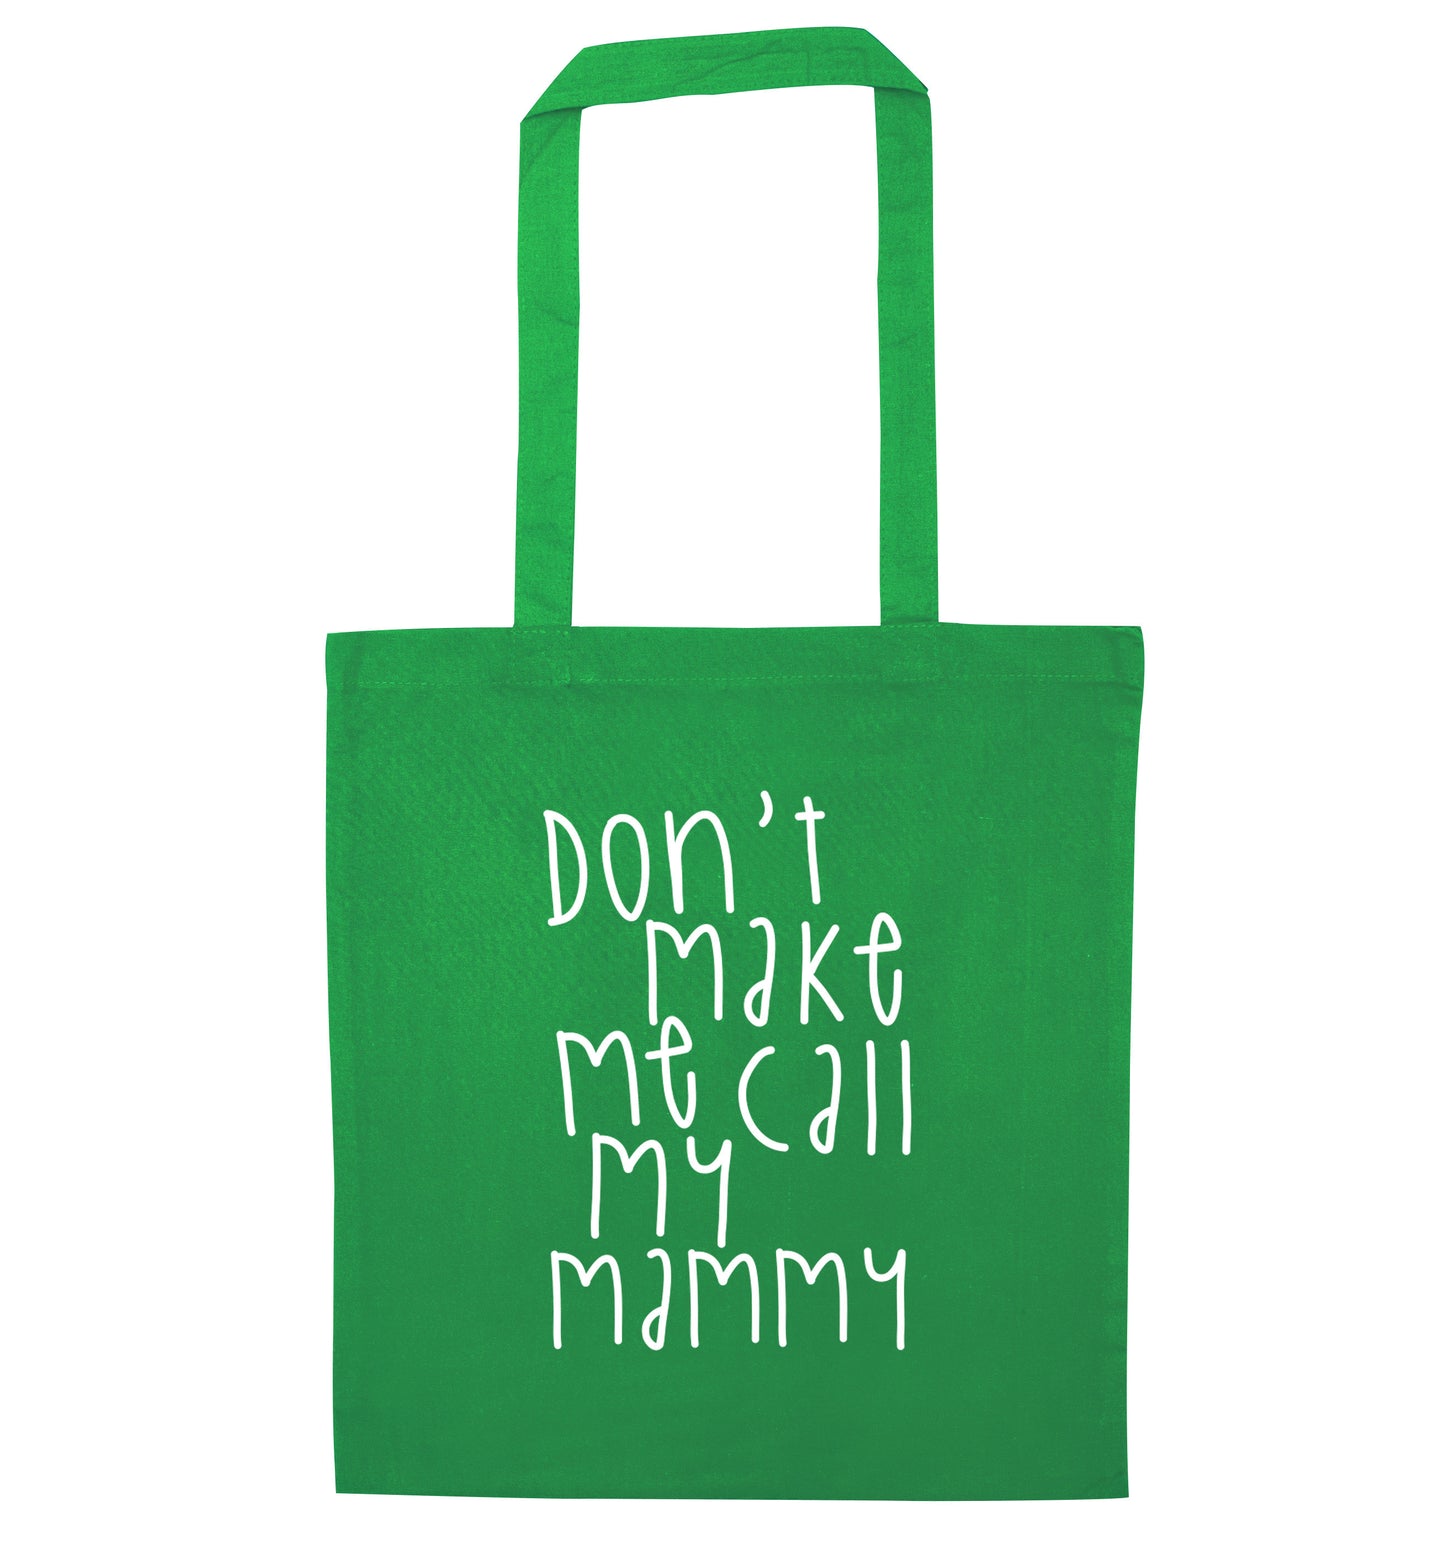 Don't make me call my mammy green tote bag